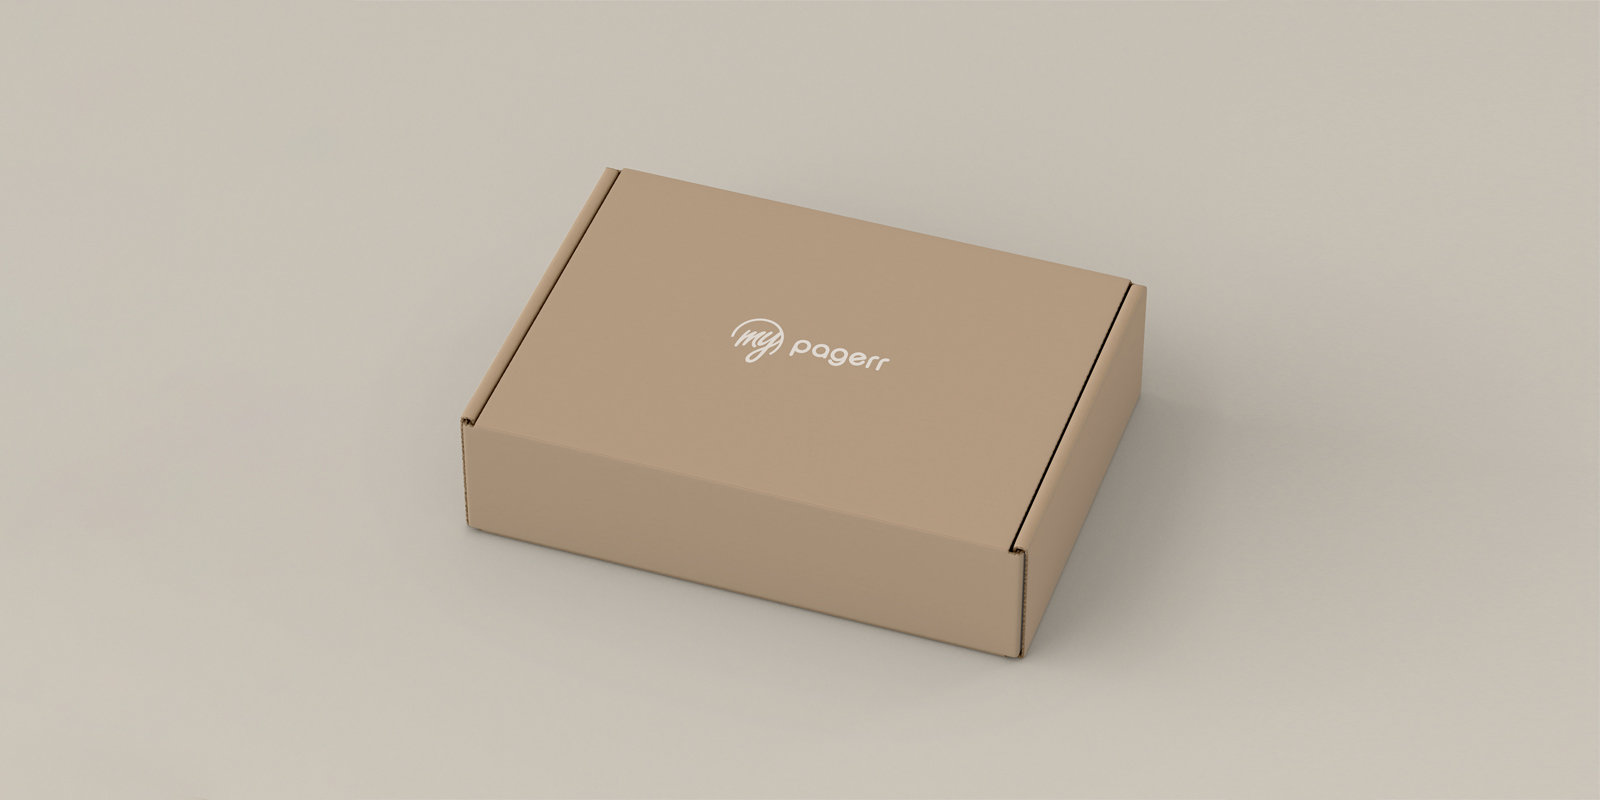 Bespoke boxes in Cairns - Print with Pagerr